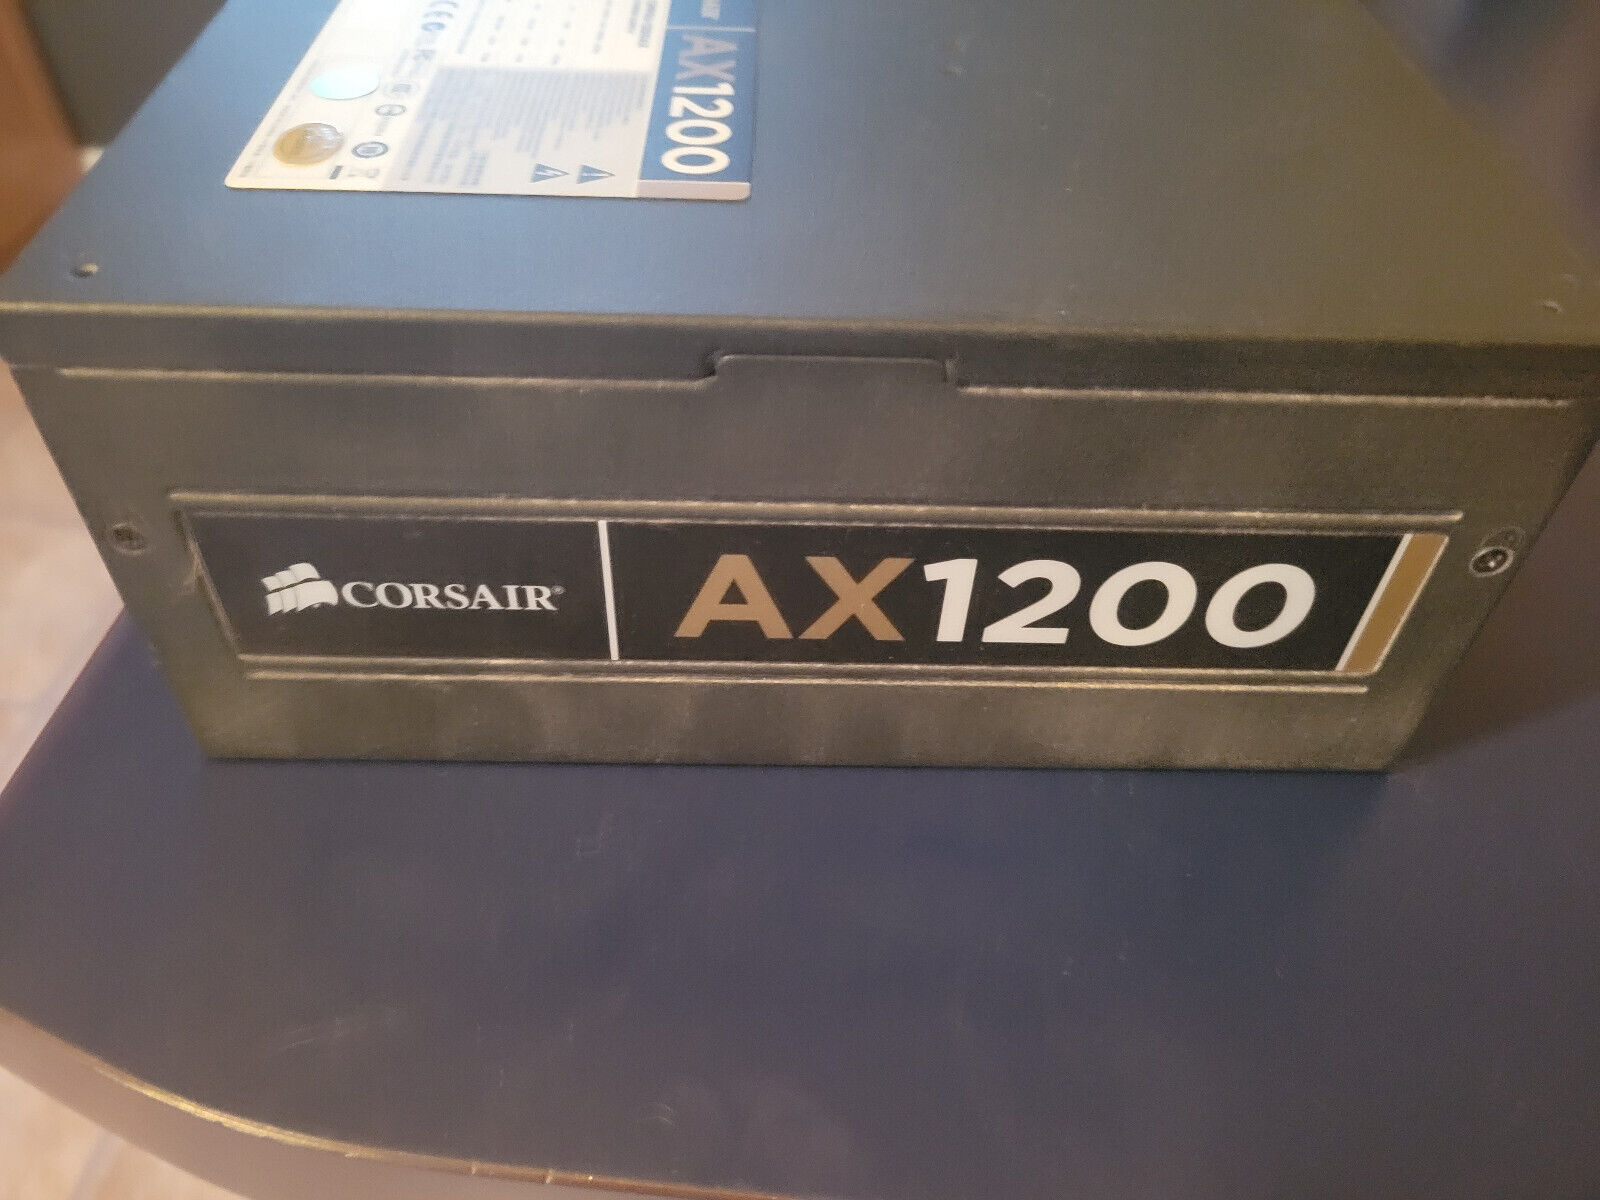 Corsair Professional Series Gold AX1200 - 80 Plus Gold - Power Supply - Tested